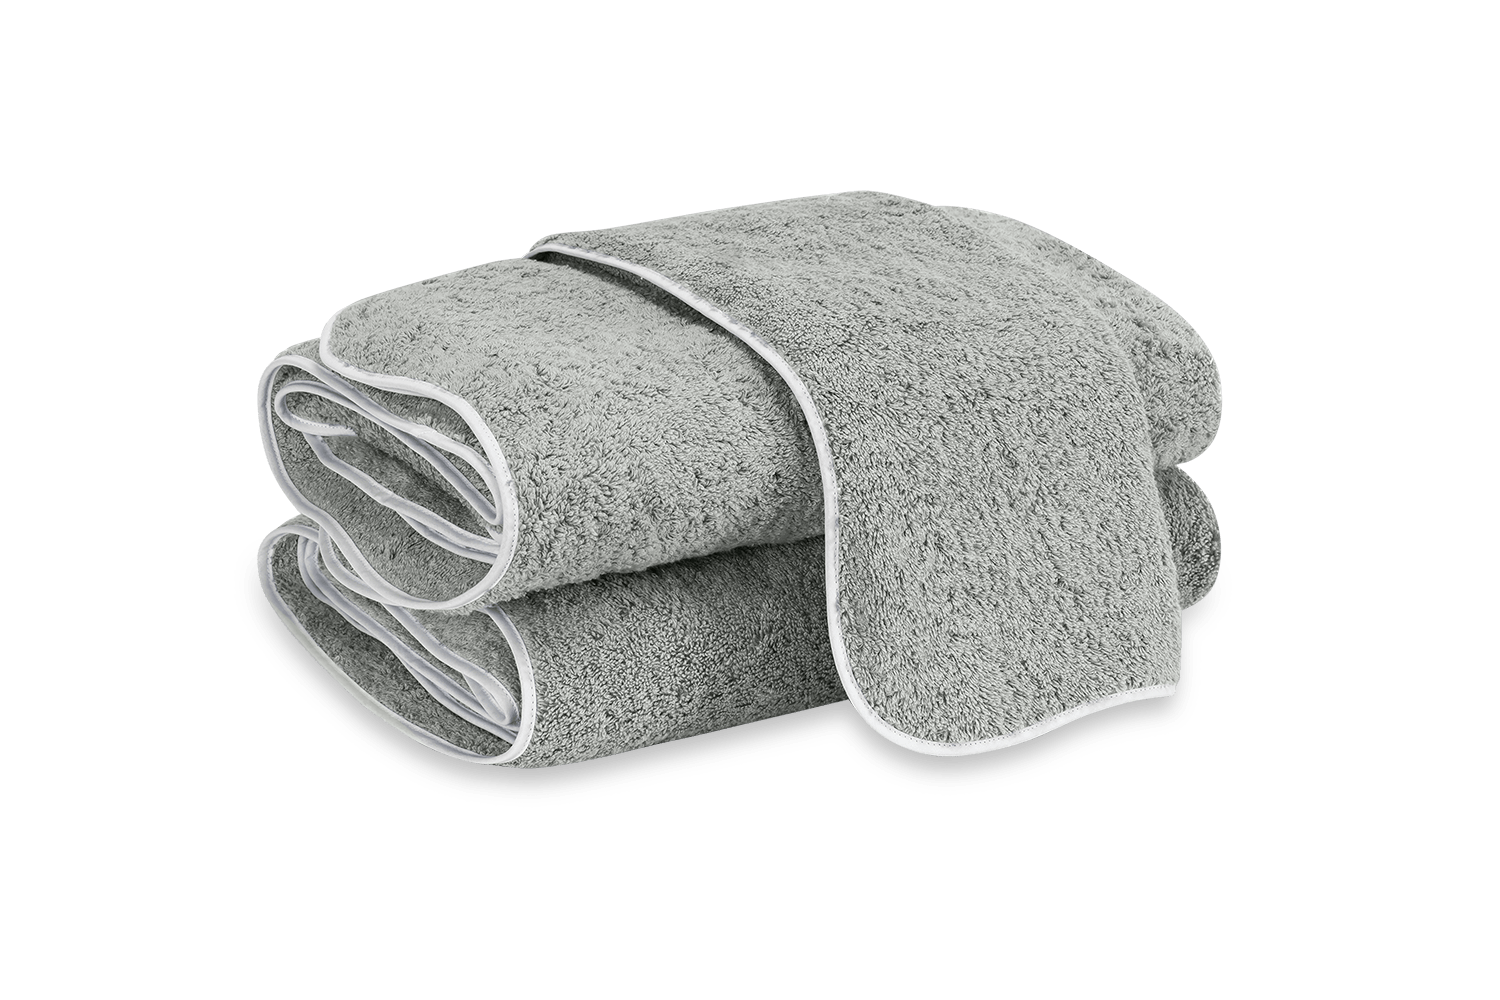 https://matouk-website.imgix.net/spree/products/6295/original/Cairo_Wave_towels_PoolWhite_primary.png?1582212867